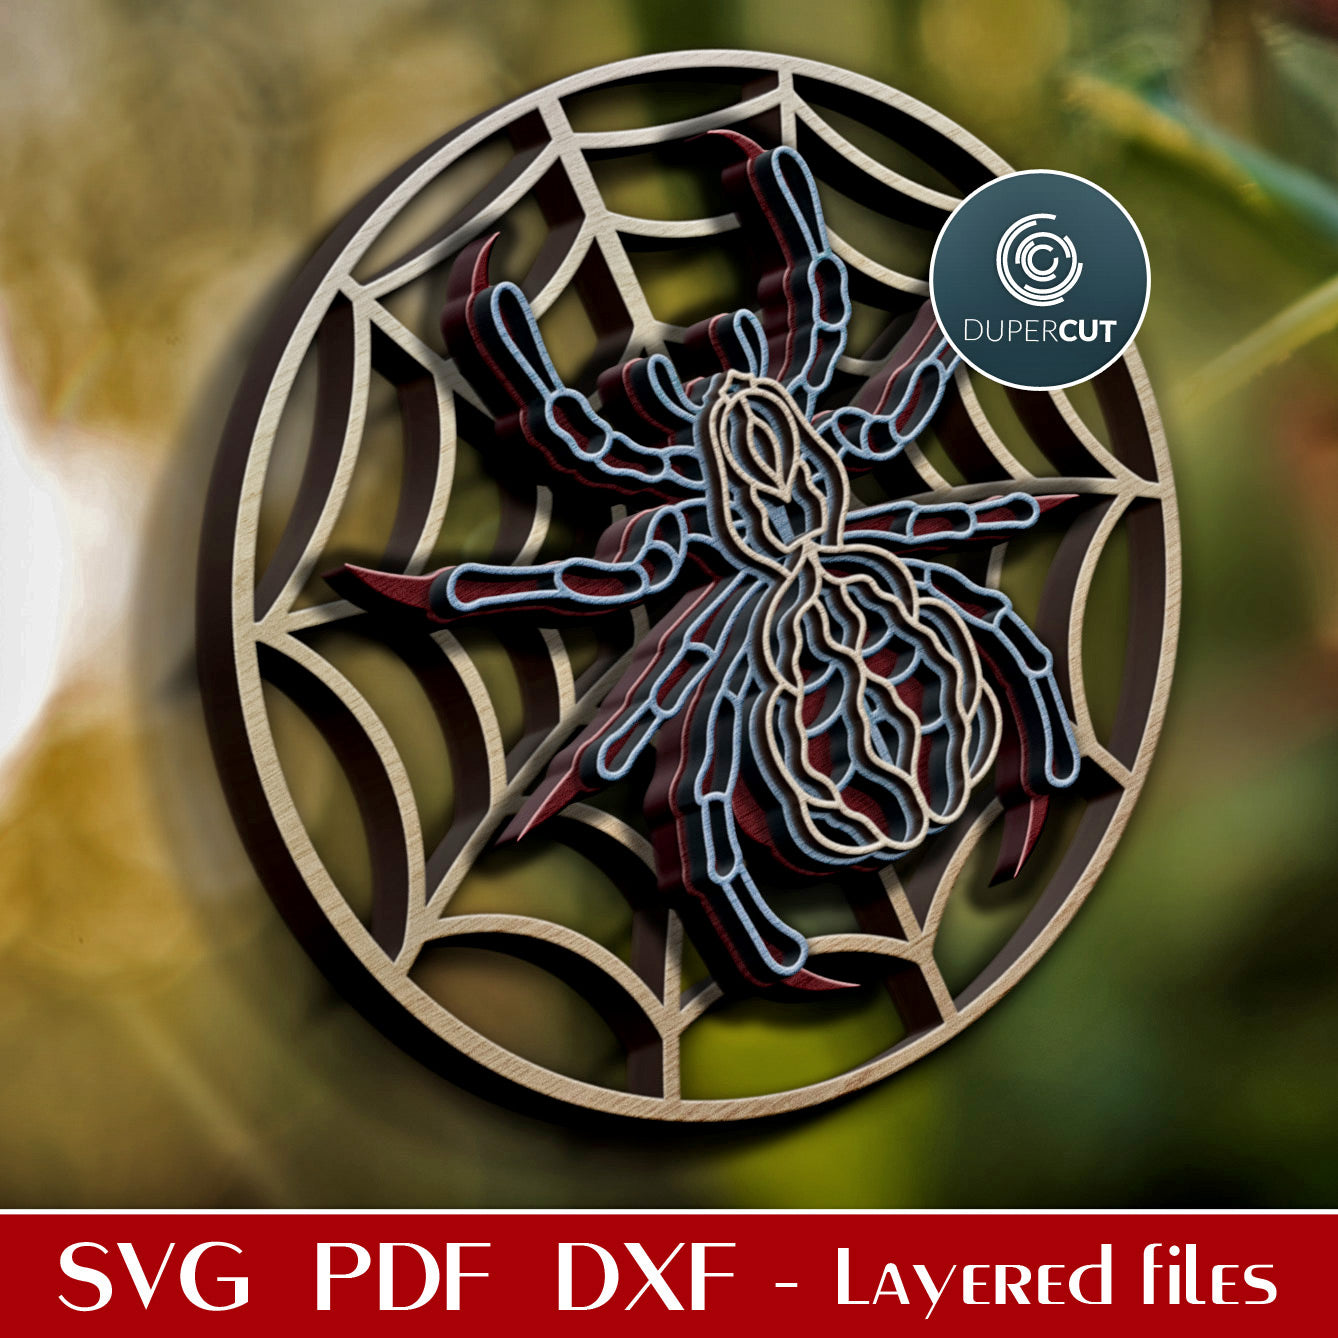 Spider - multi-layer cut files for wall decoration - SVG PDF DXF vector template for Glowforge, Cricut, Silhouette Cameo, laser cutting machines